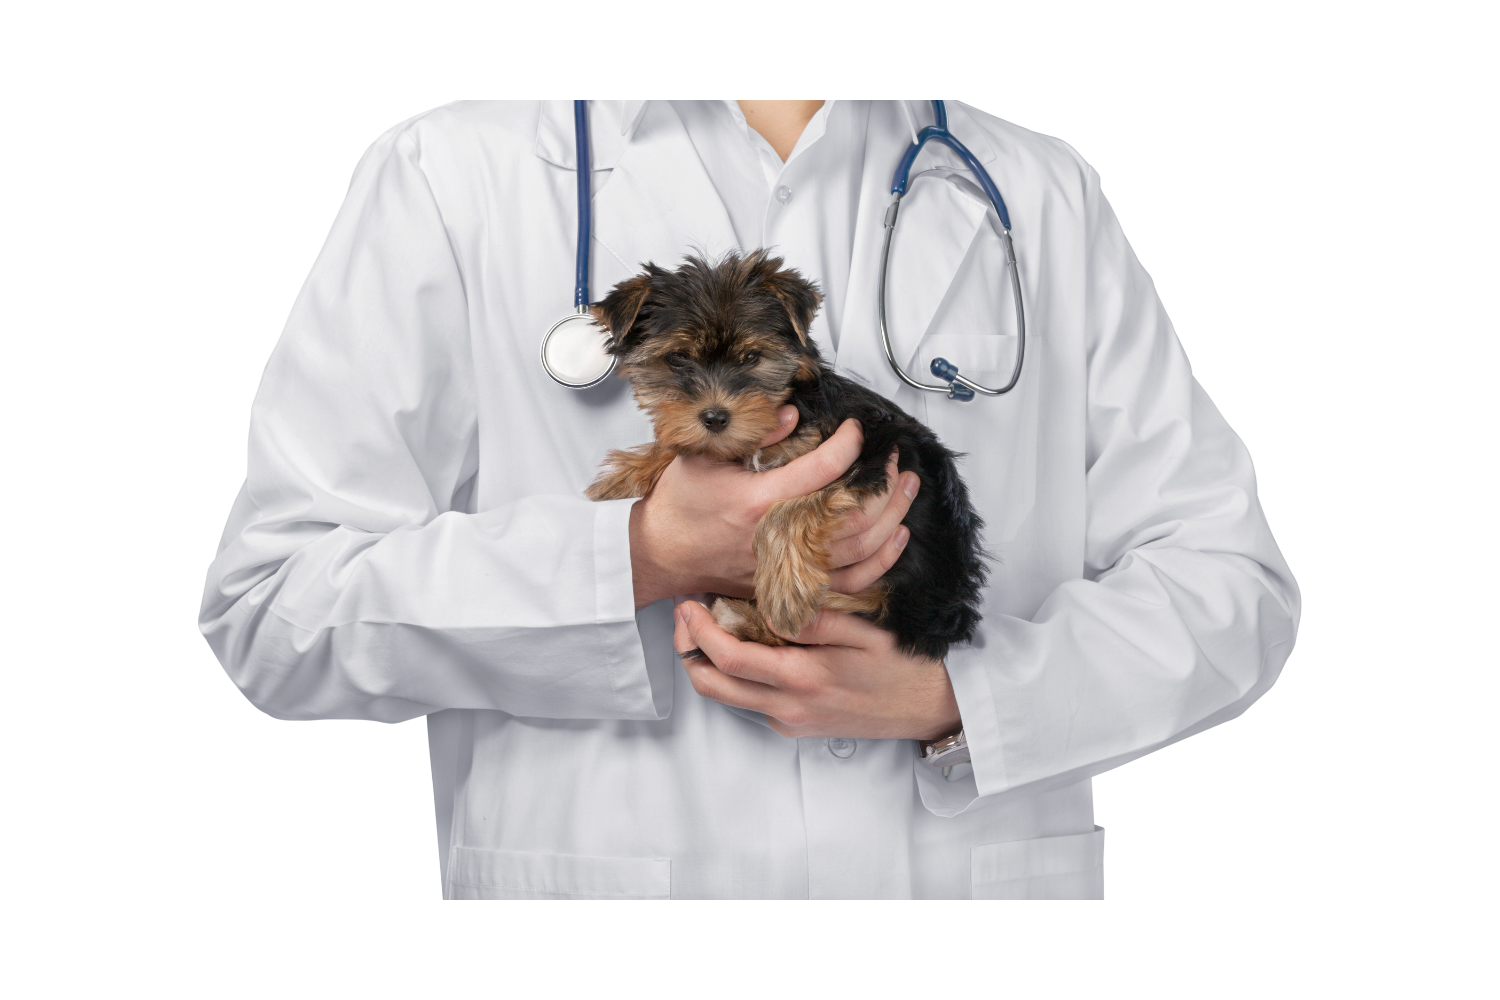 Veterinarian Holding a Puppy